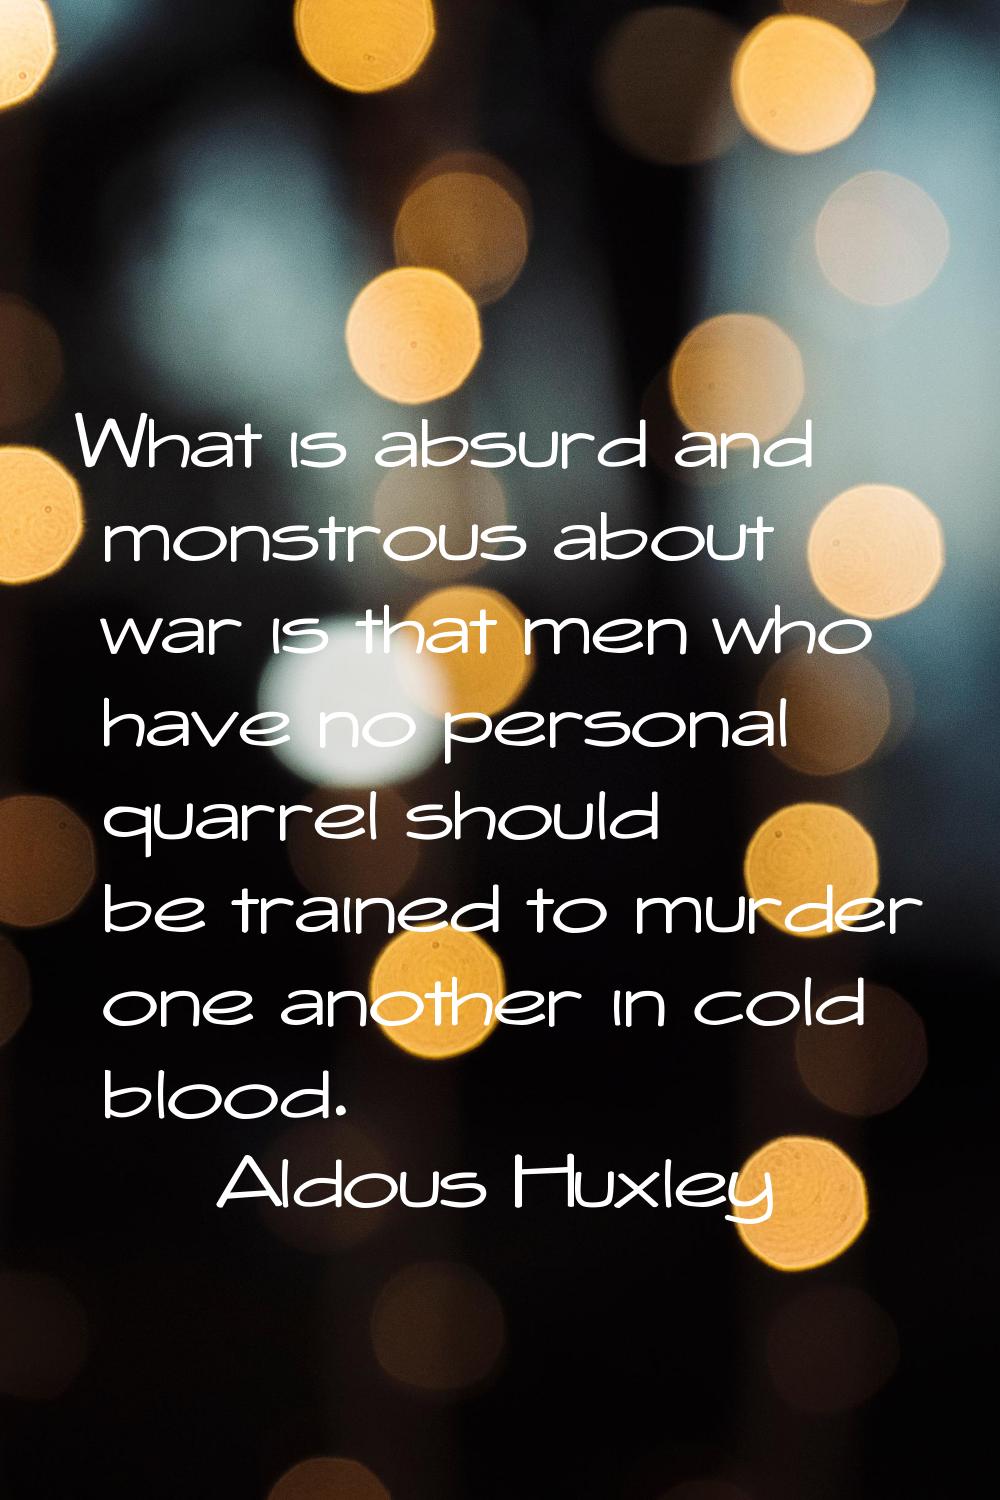 What is absurd and monstrous about war is that men who have no personal quarrel should be trained t